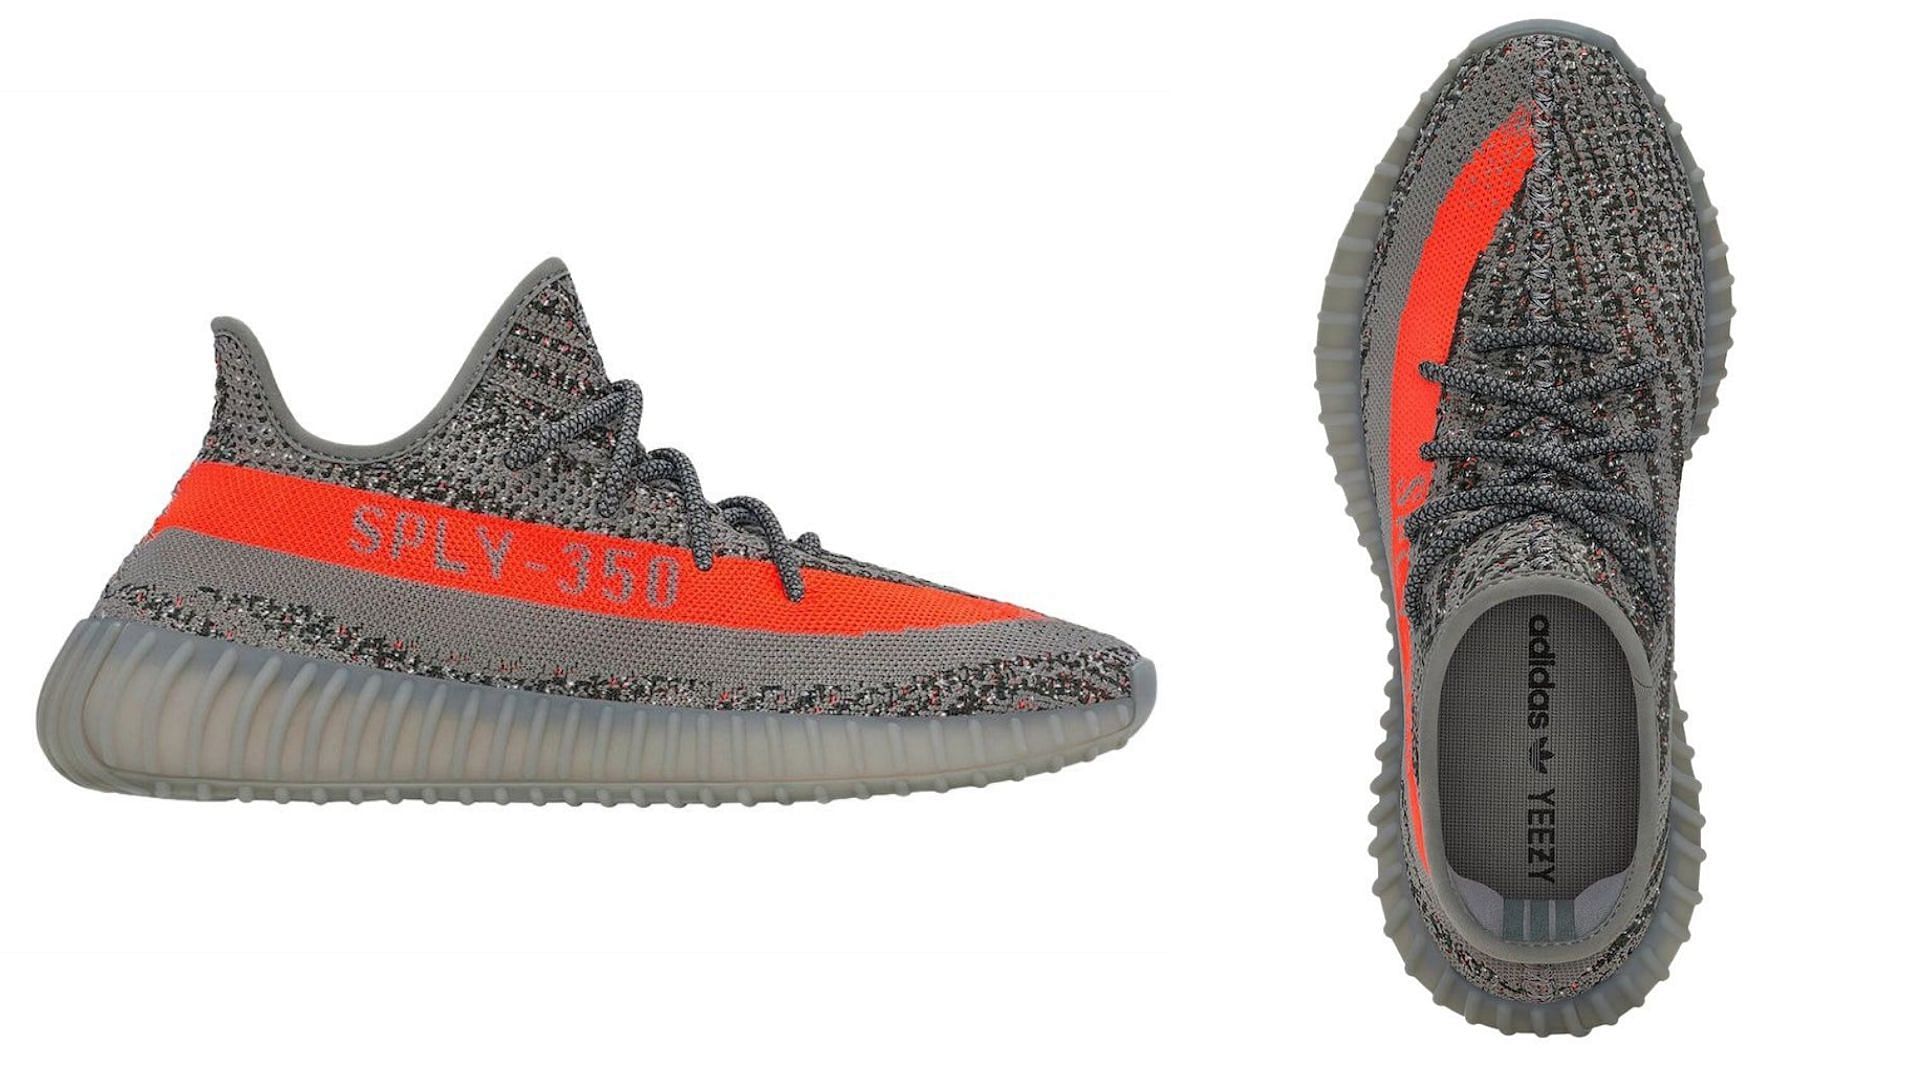 Rama Circunferencia interrumpir 6 Adidas Yeezy Boost 350 V2 colorways to look out for